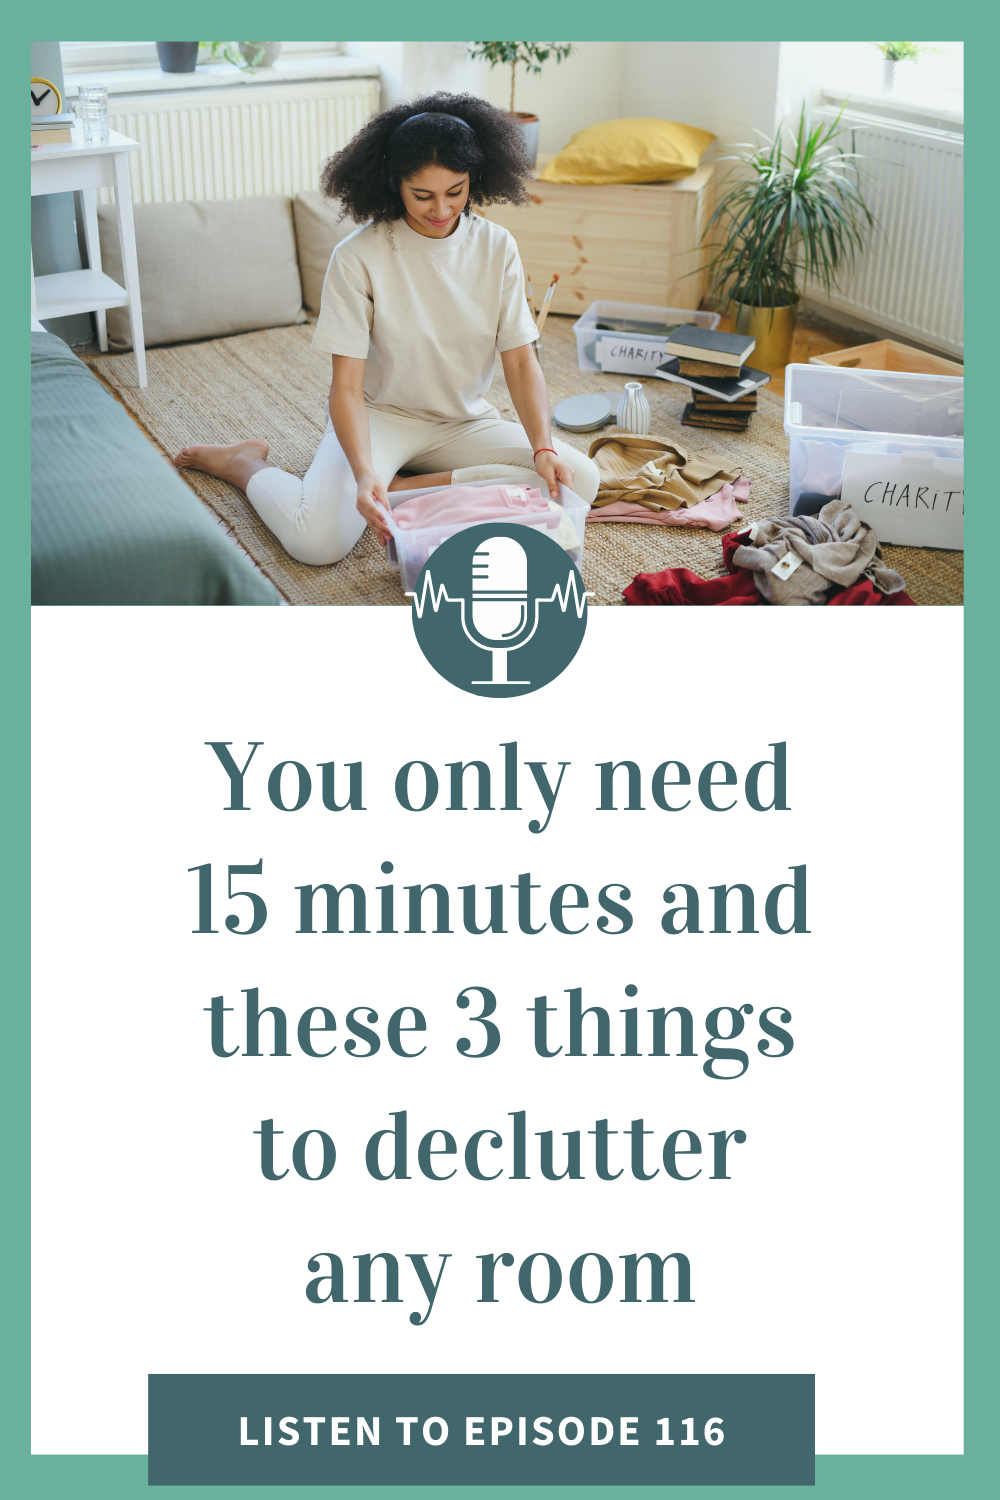 You only need 15 minutes and these 3 things to declutter any room